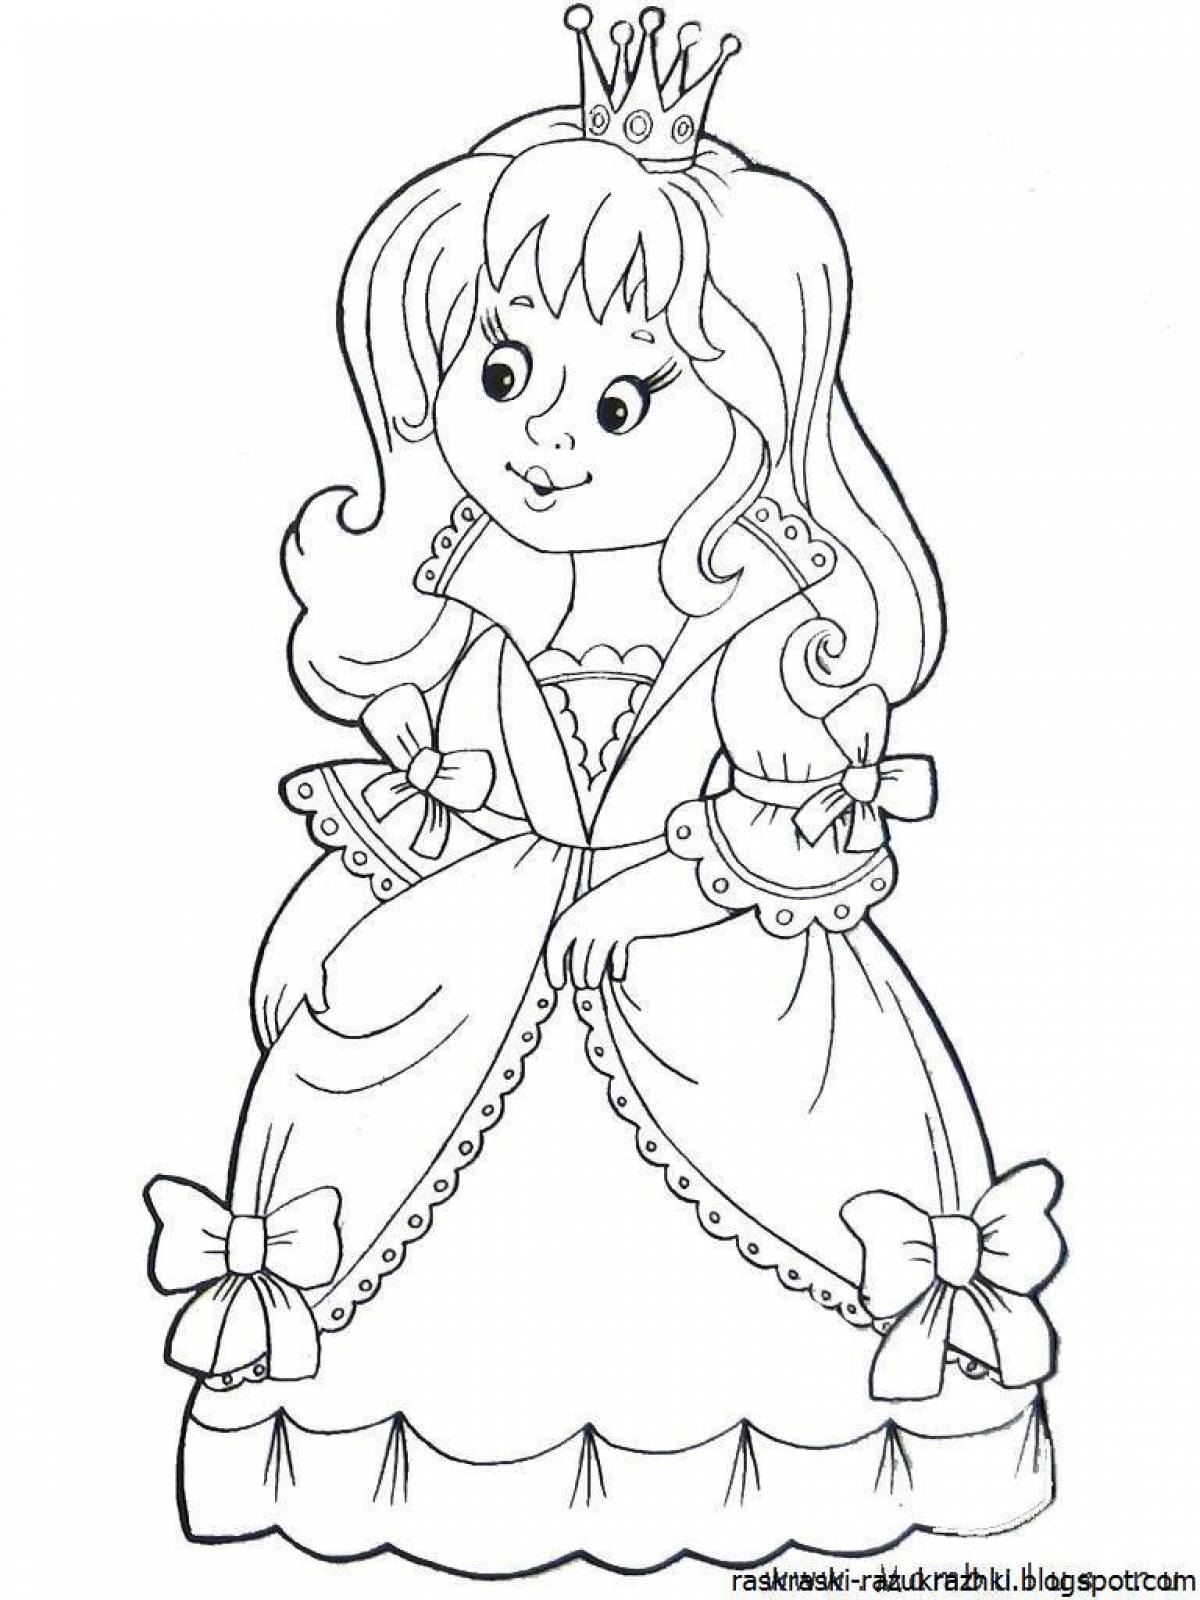 Dreamy princess coloring book for kids 3-4 years old